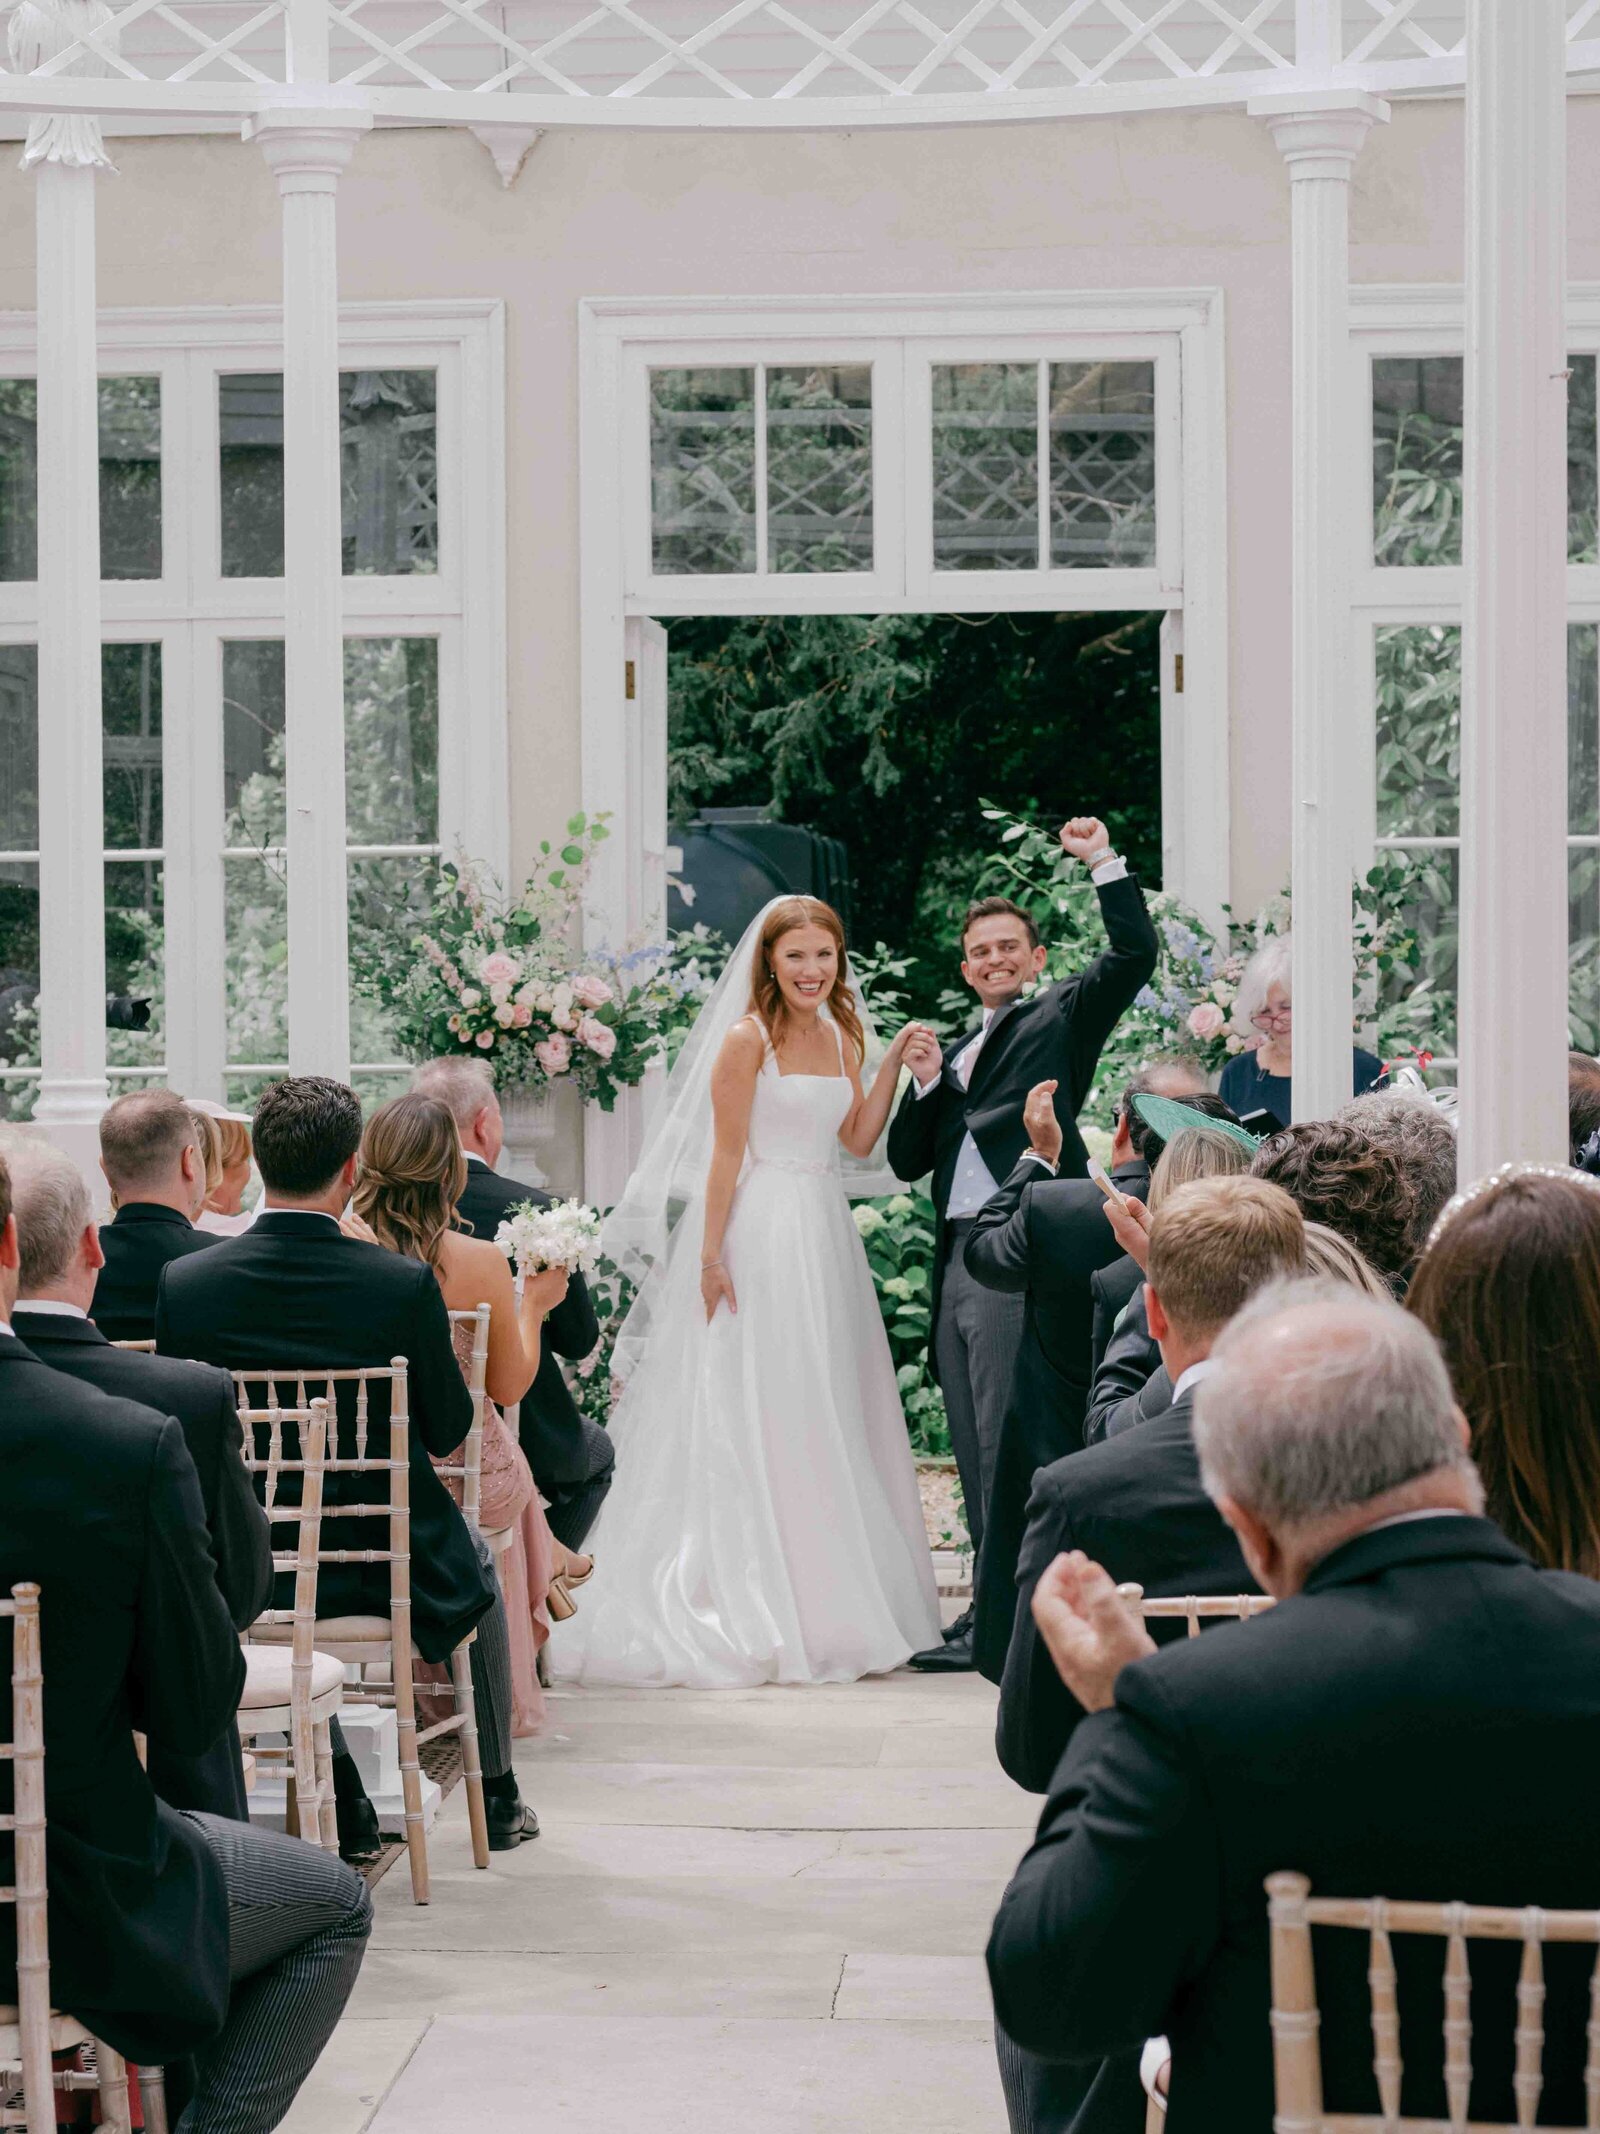 Wedding Ceremony in the Conservatory at Came house